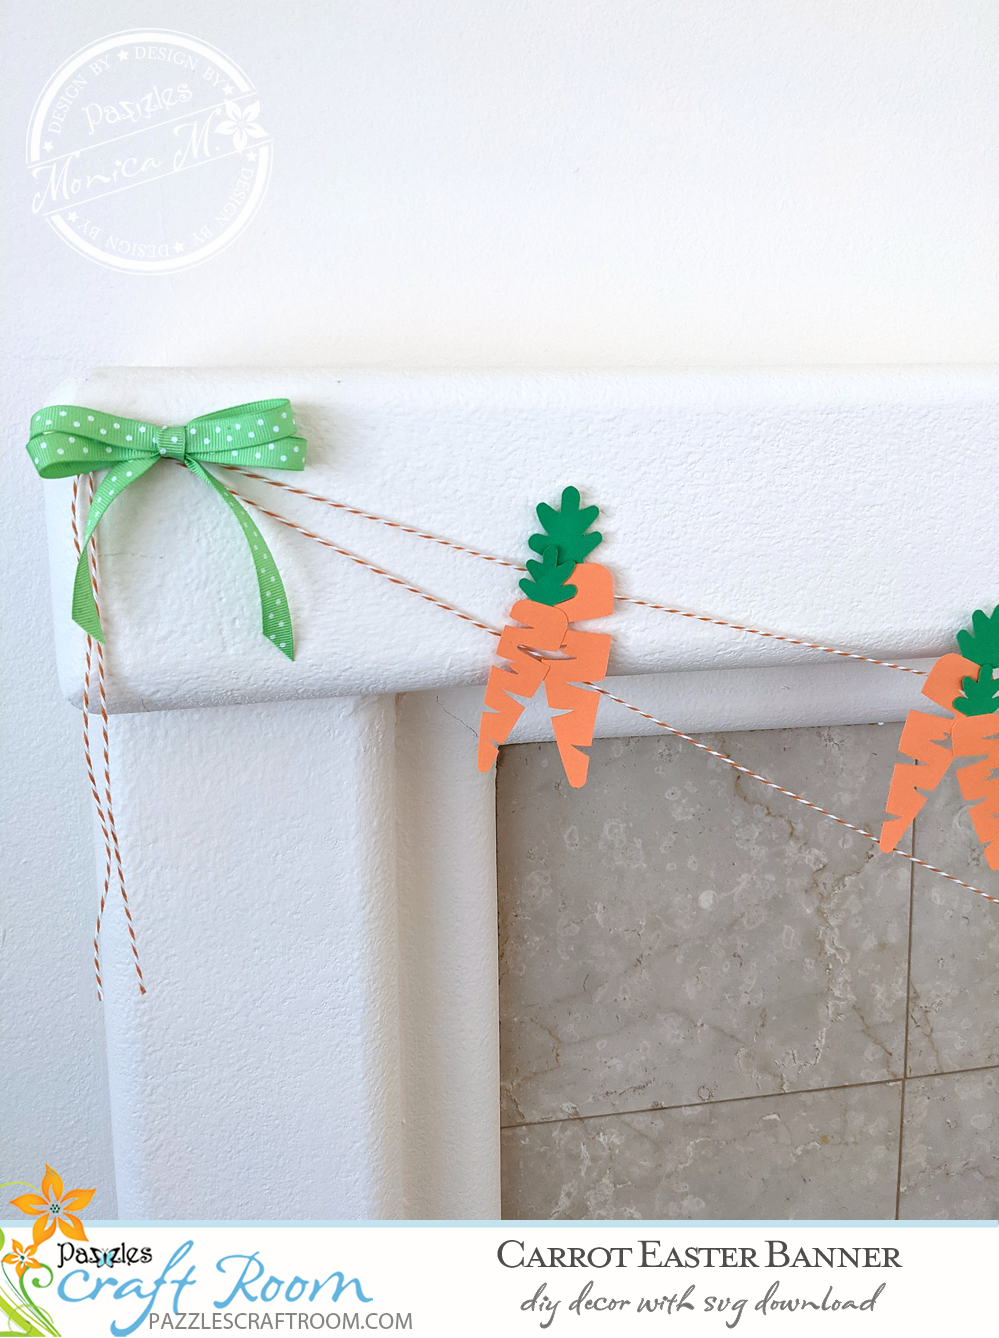 Pazzles DIY Carrots Easter Banner. Instant SVG download compatible with all major electronic cutters including Pazzles Inspiration, Cricut, and Silhouette Cameo. Design by Monica Martinez.